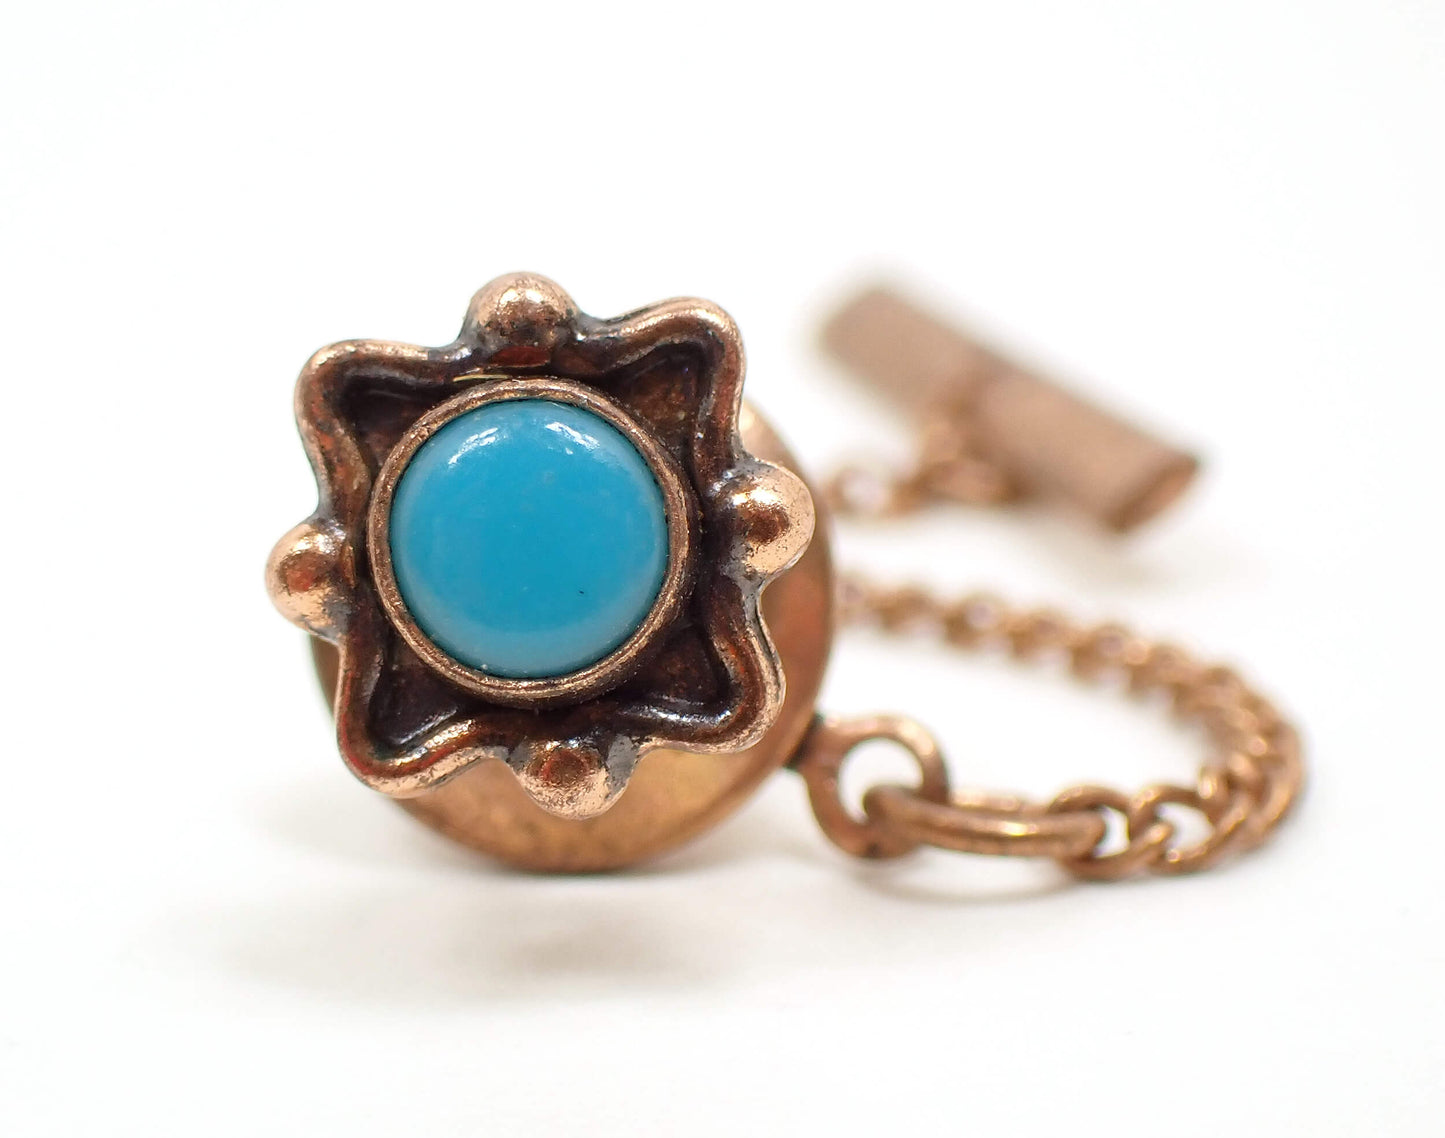 Copper Plated Retro Vintage Faux Turquoise Tie Tack, Southwestern Style Tie Pin